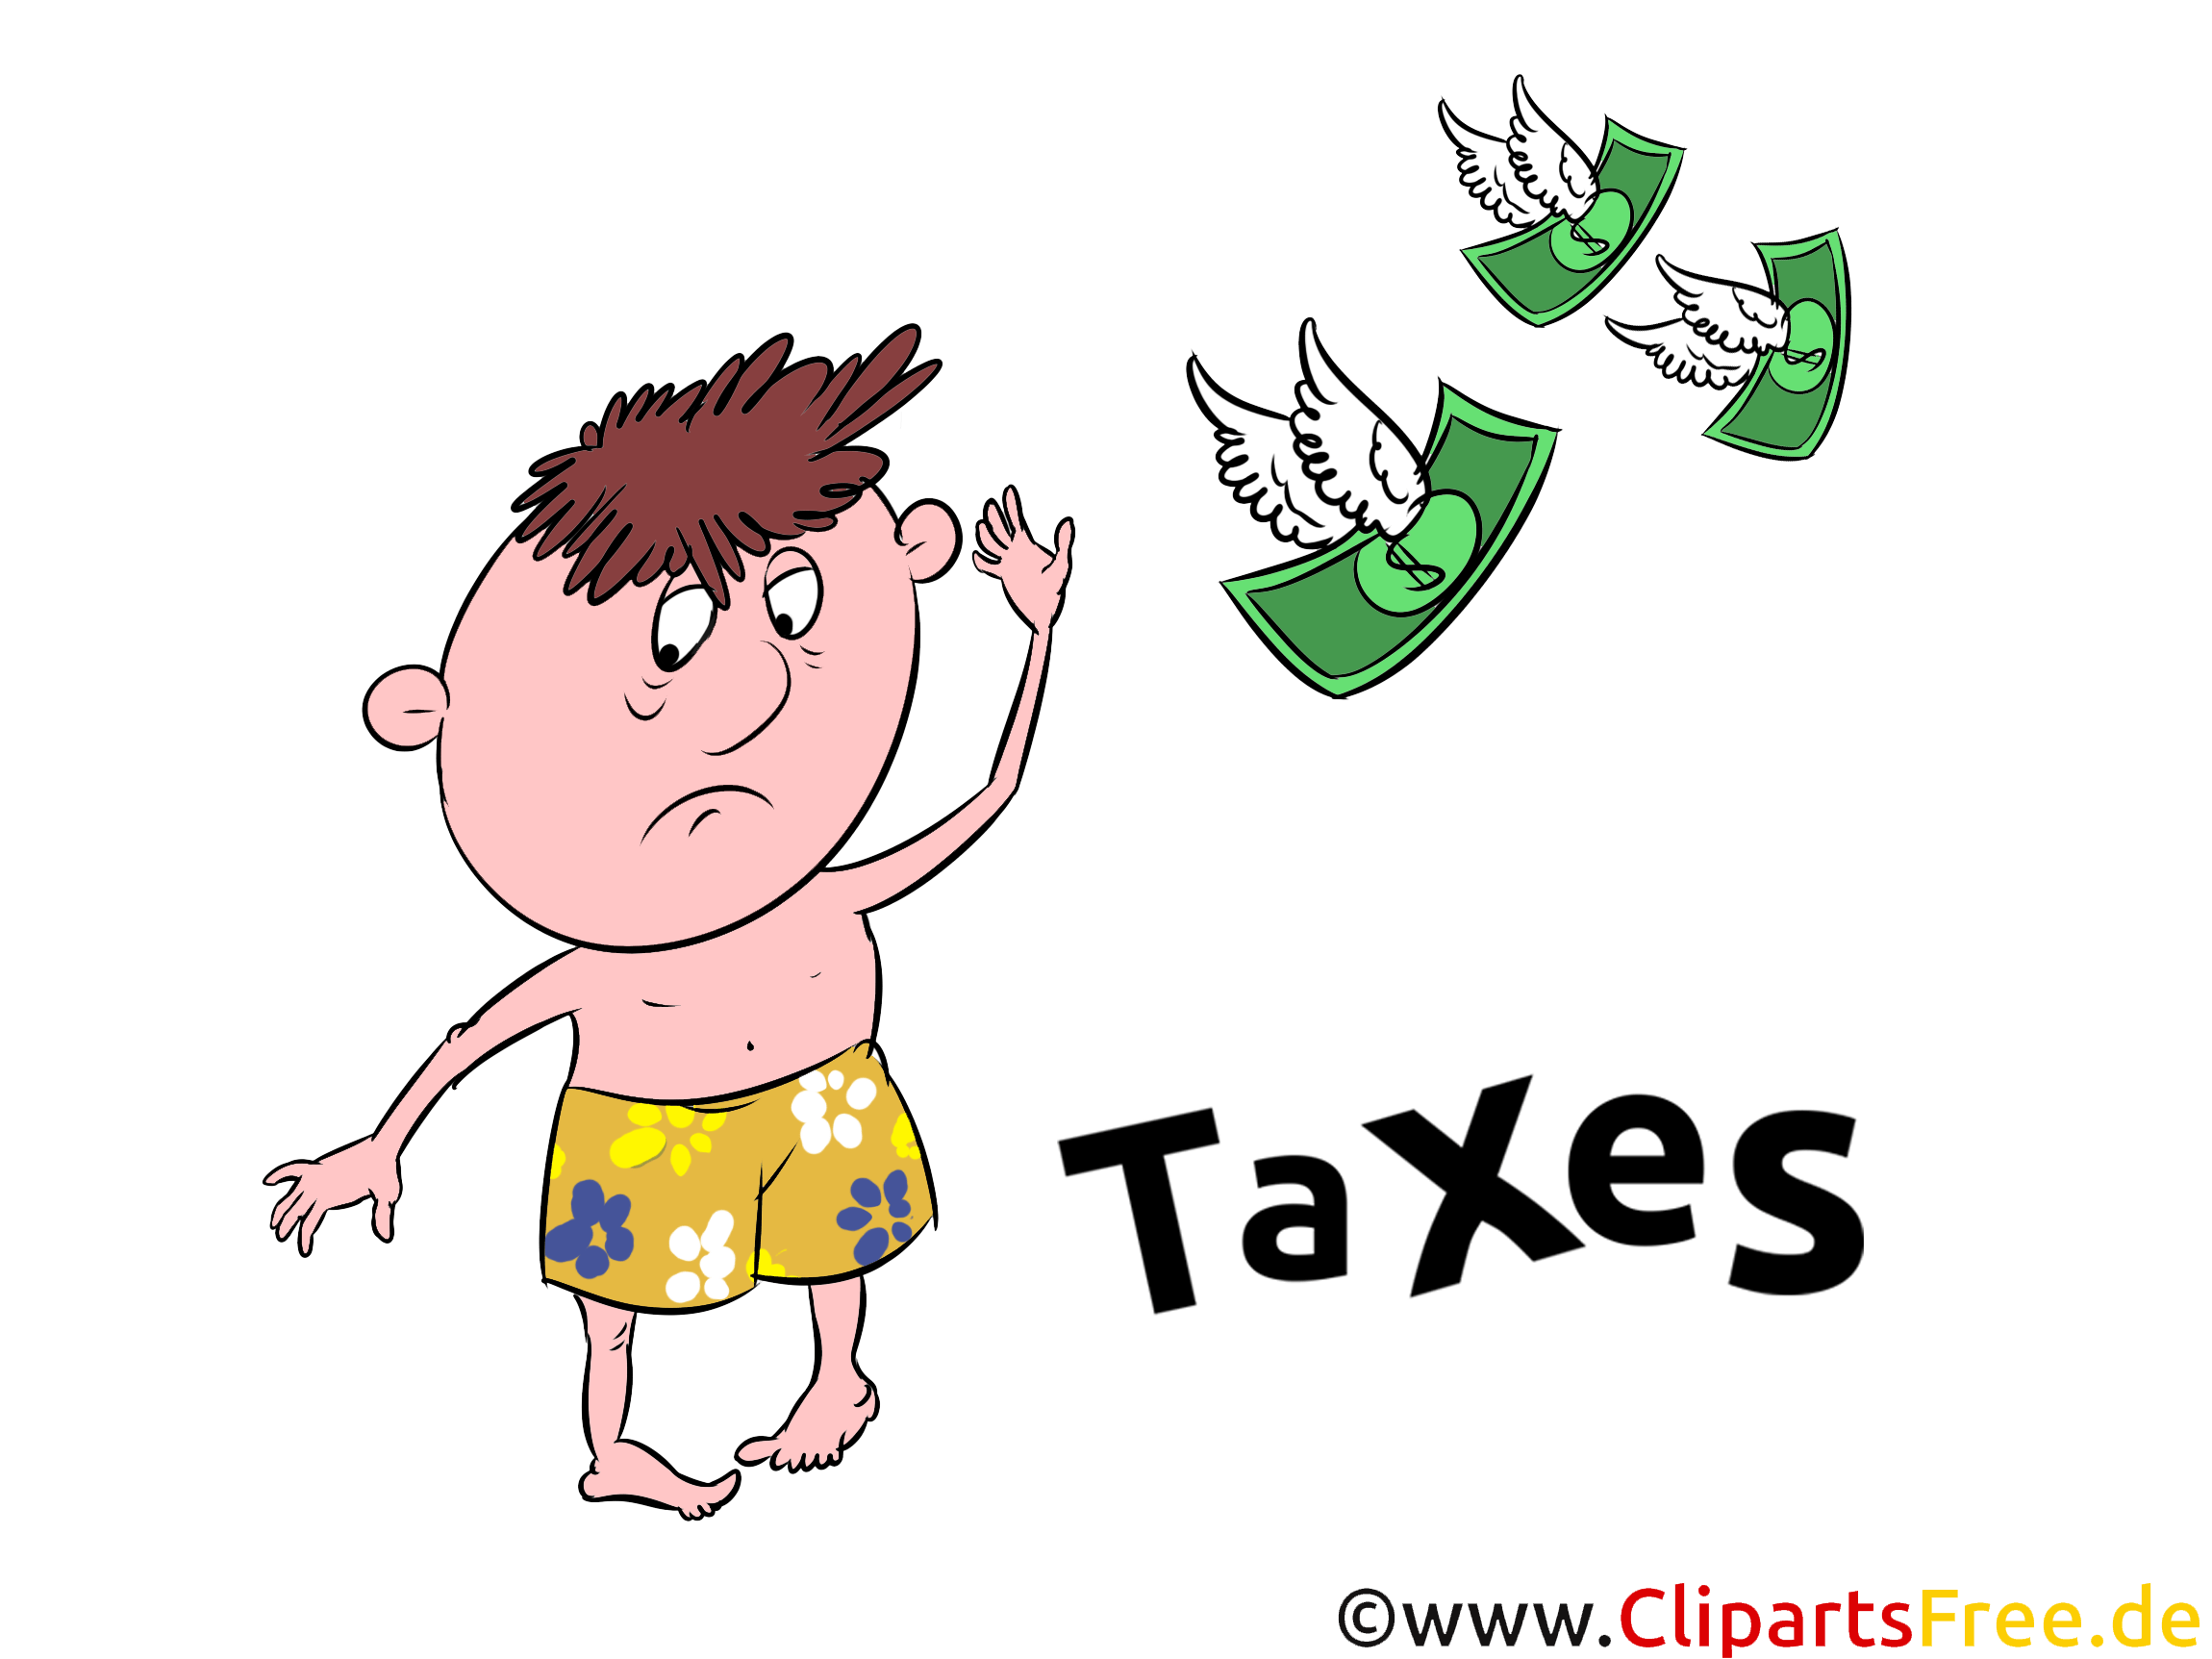 taxes_clip_art_free_20170903_1291812452-....png